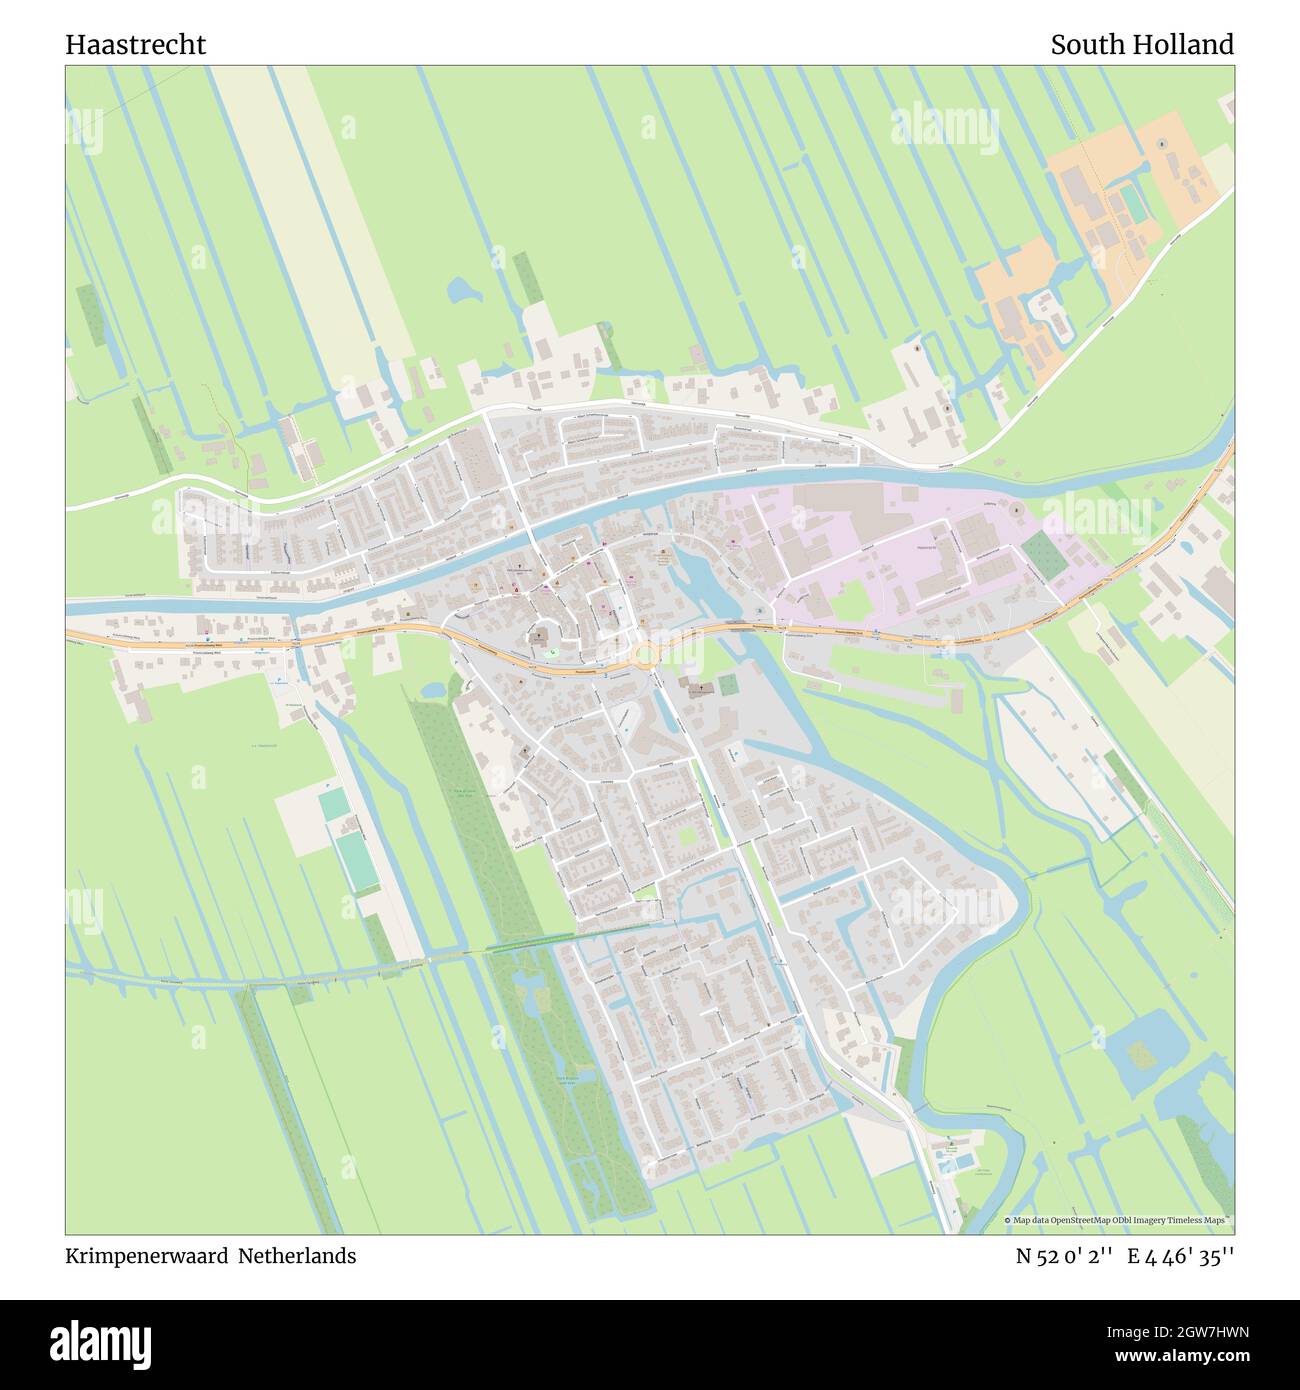 Haastrecht, Krimpenerwaard, Netherlands, South Holland, N 52 0' 2'', E 4 46' 35'', map, Timeless Map published in 2021. Travelers, explorers and adventurers like Florence Nightingale, David Livingstone, Ernest Shackleton, Lewis and Clark and Sherlock Holmes relied on maps to plan travels to the world's most remote corners, Timeless Maps is mapping most locations on the globe, showing the achievement of great dreams Stock Photo